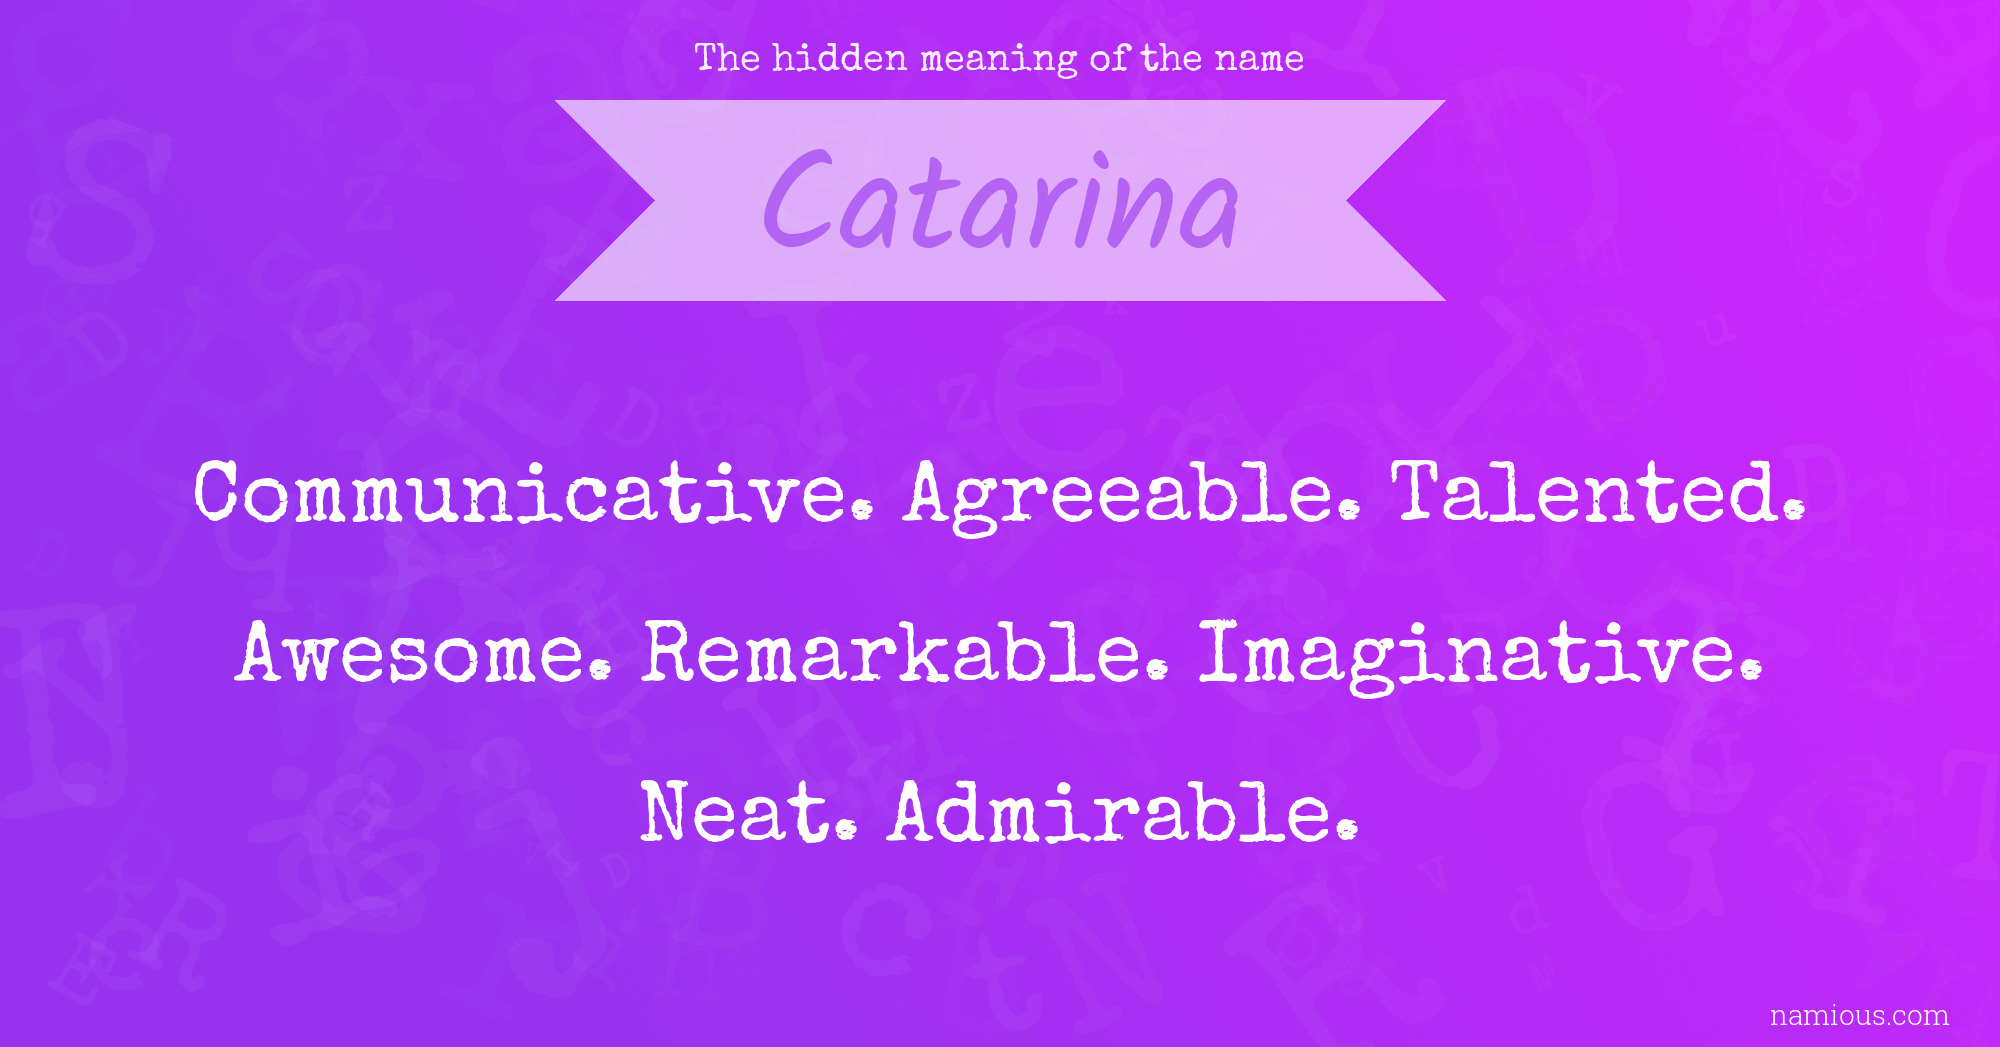 The hidden meaning of the name Catarina